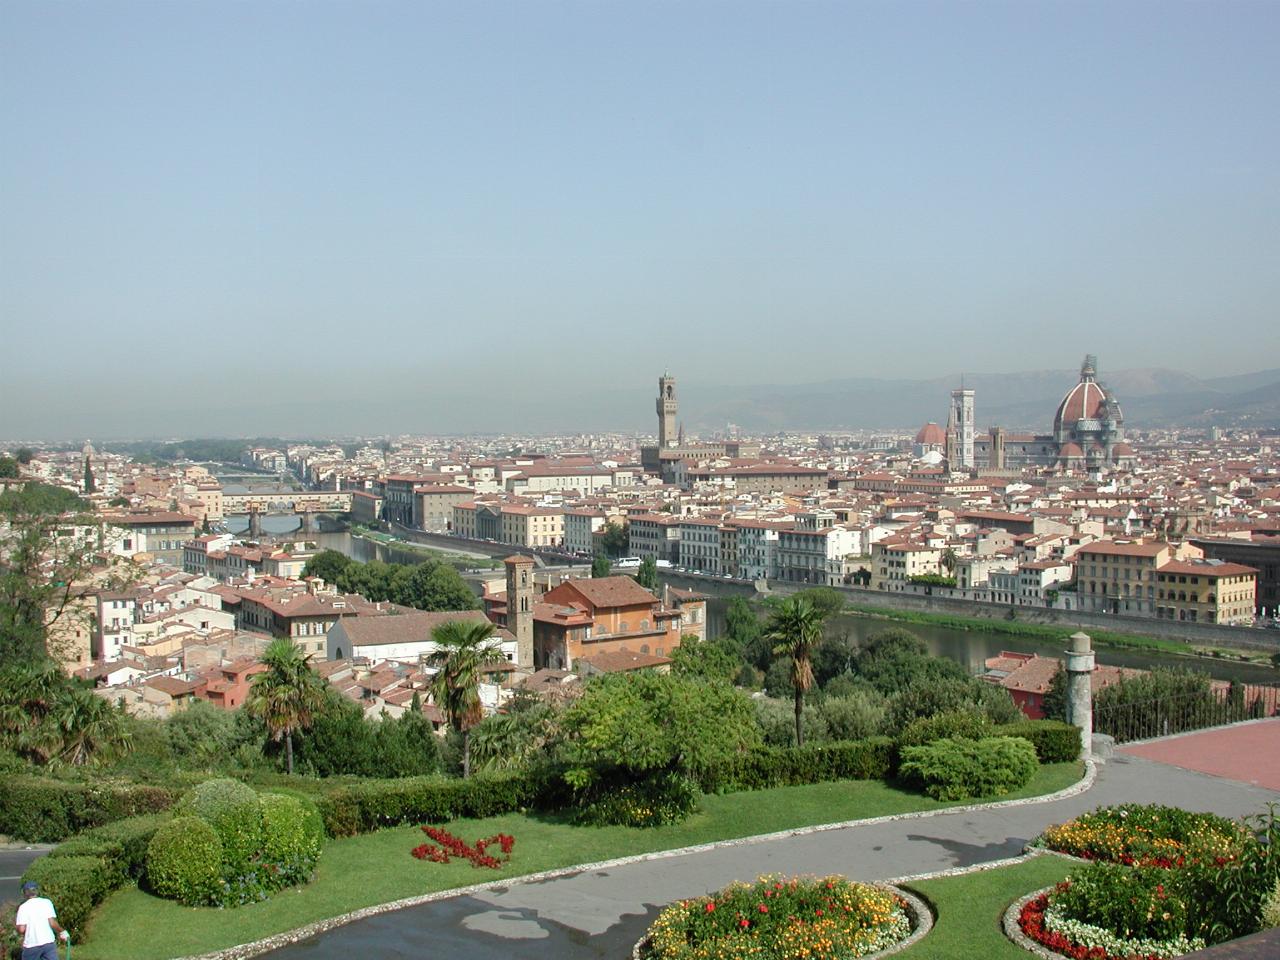 Florence, as seen from Piazzale Michelangelo